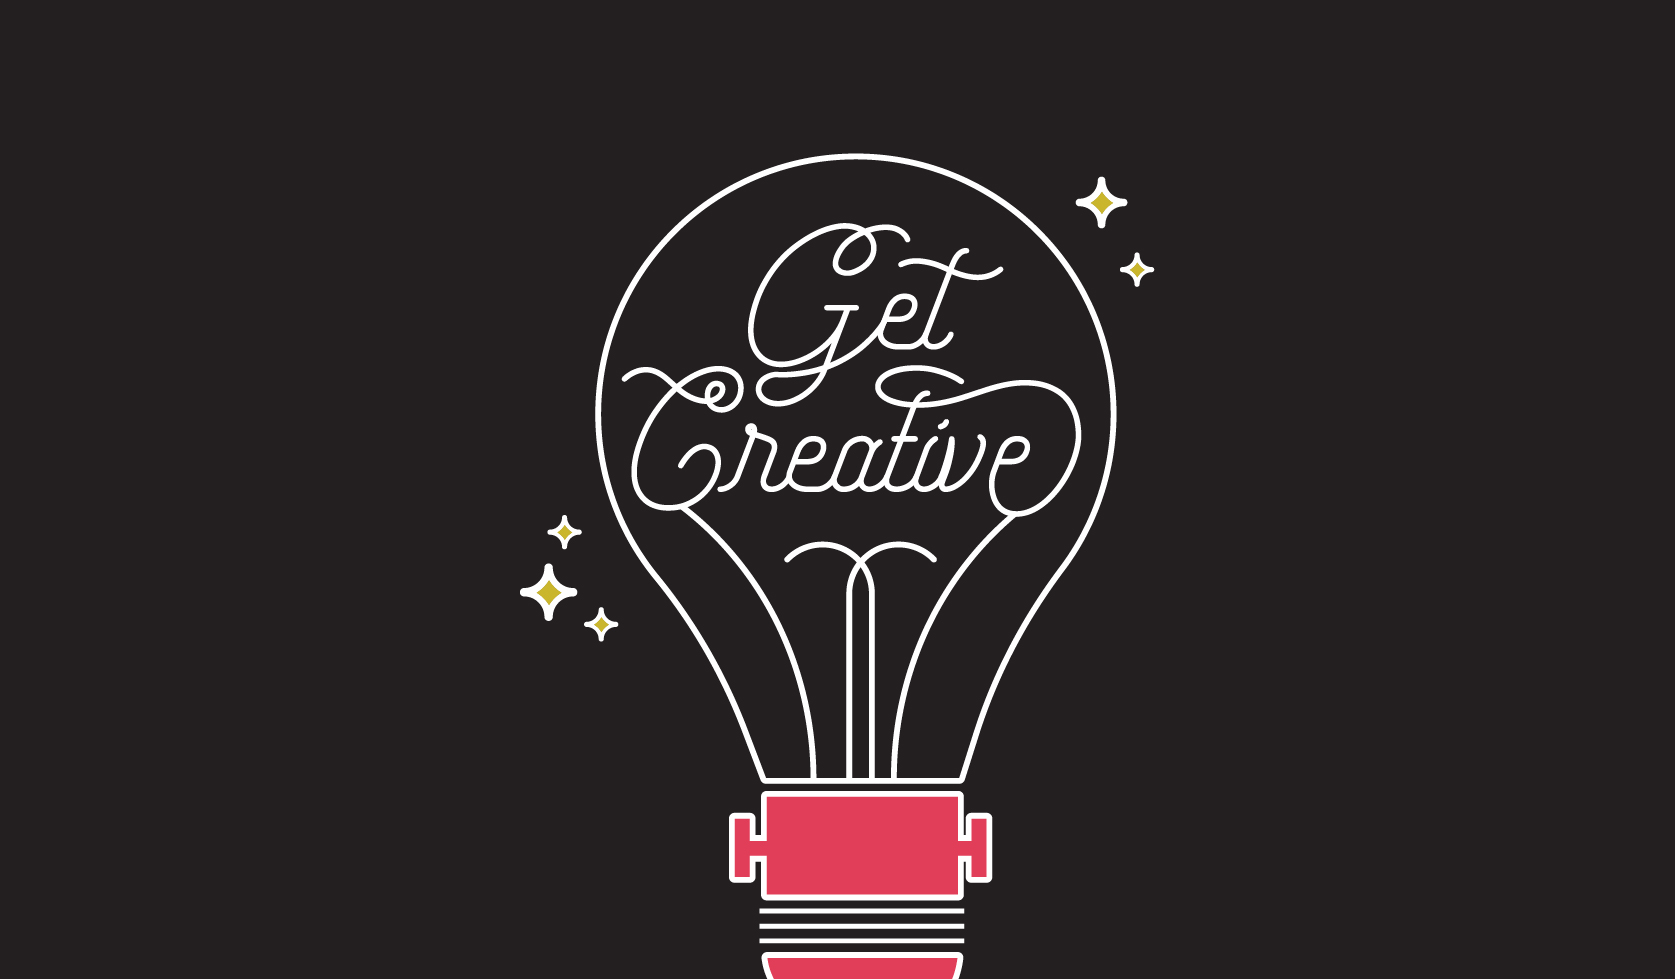 A line illustration of a light bulb with the words "Get Creative" inside.